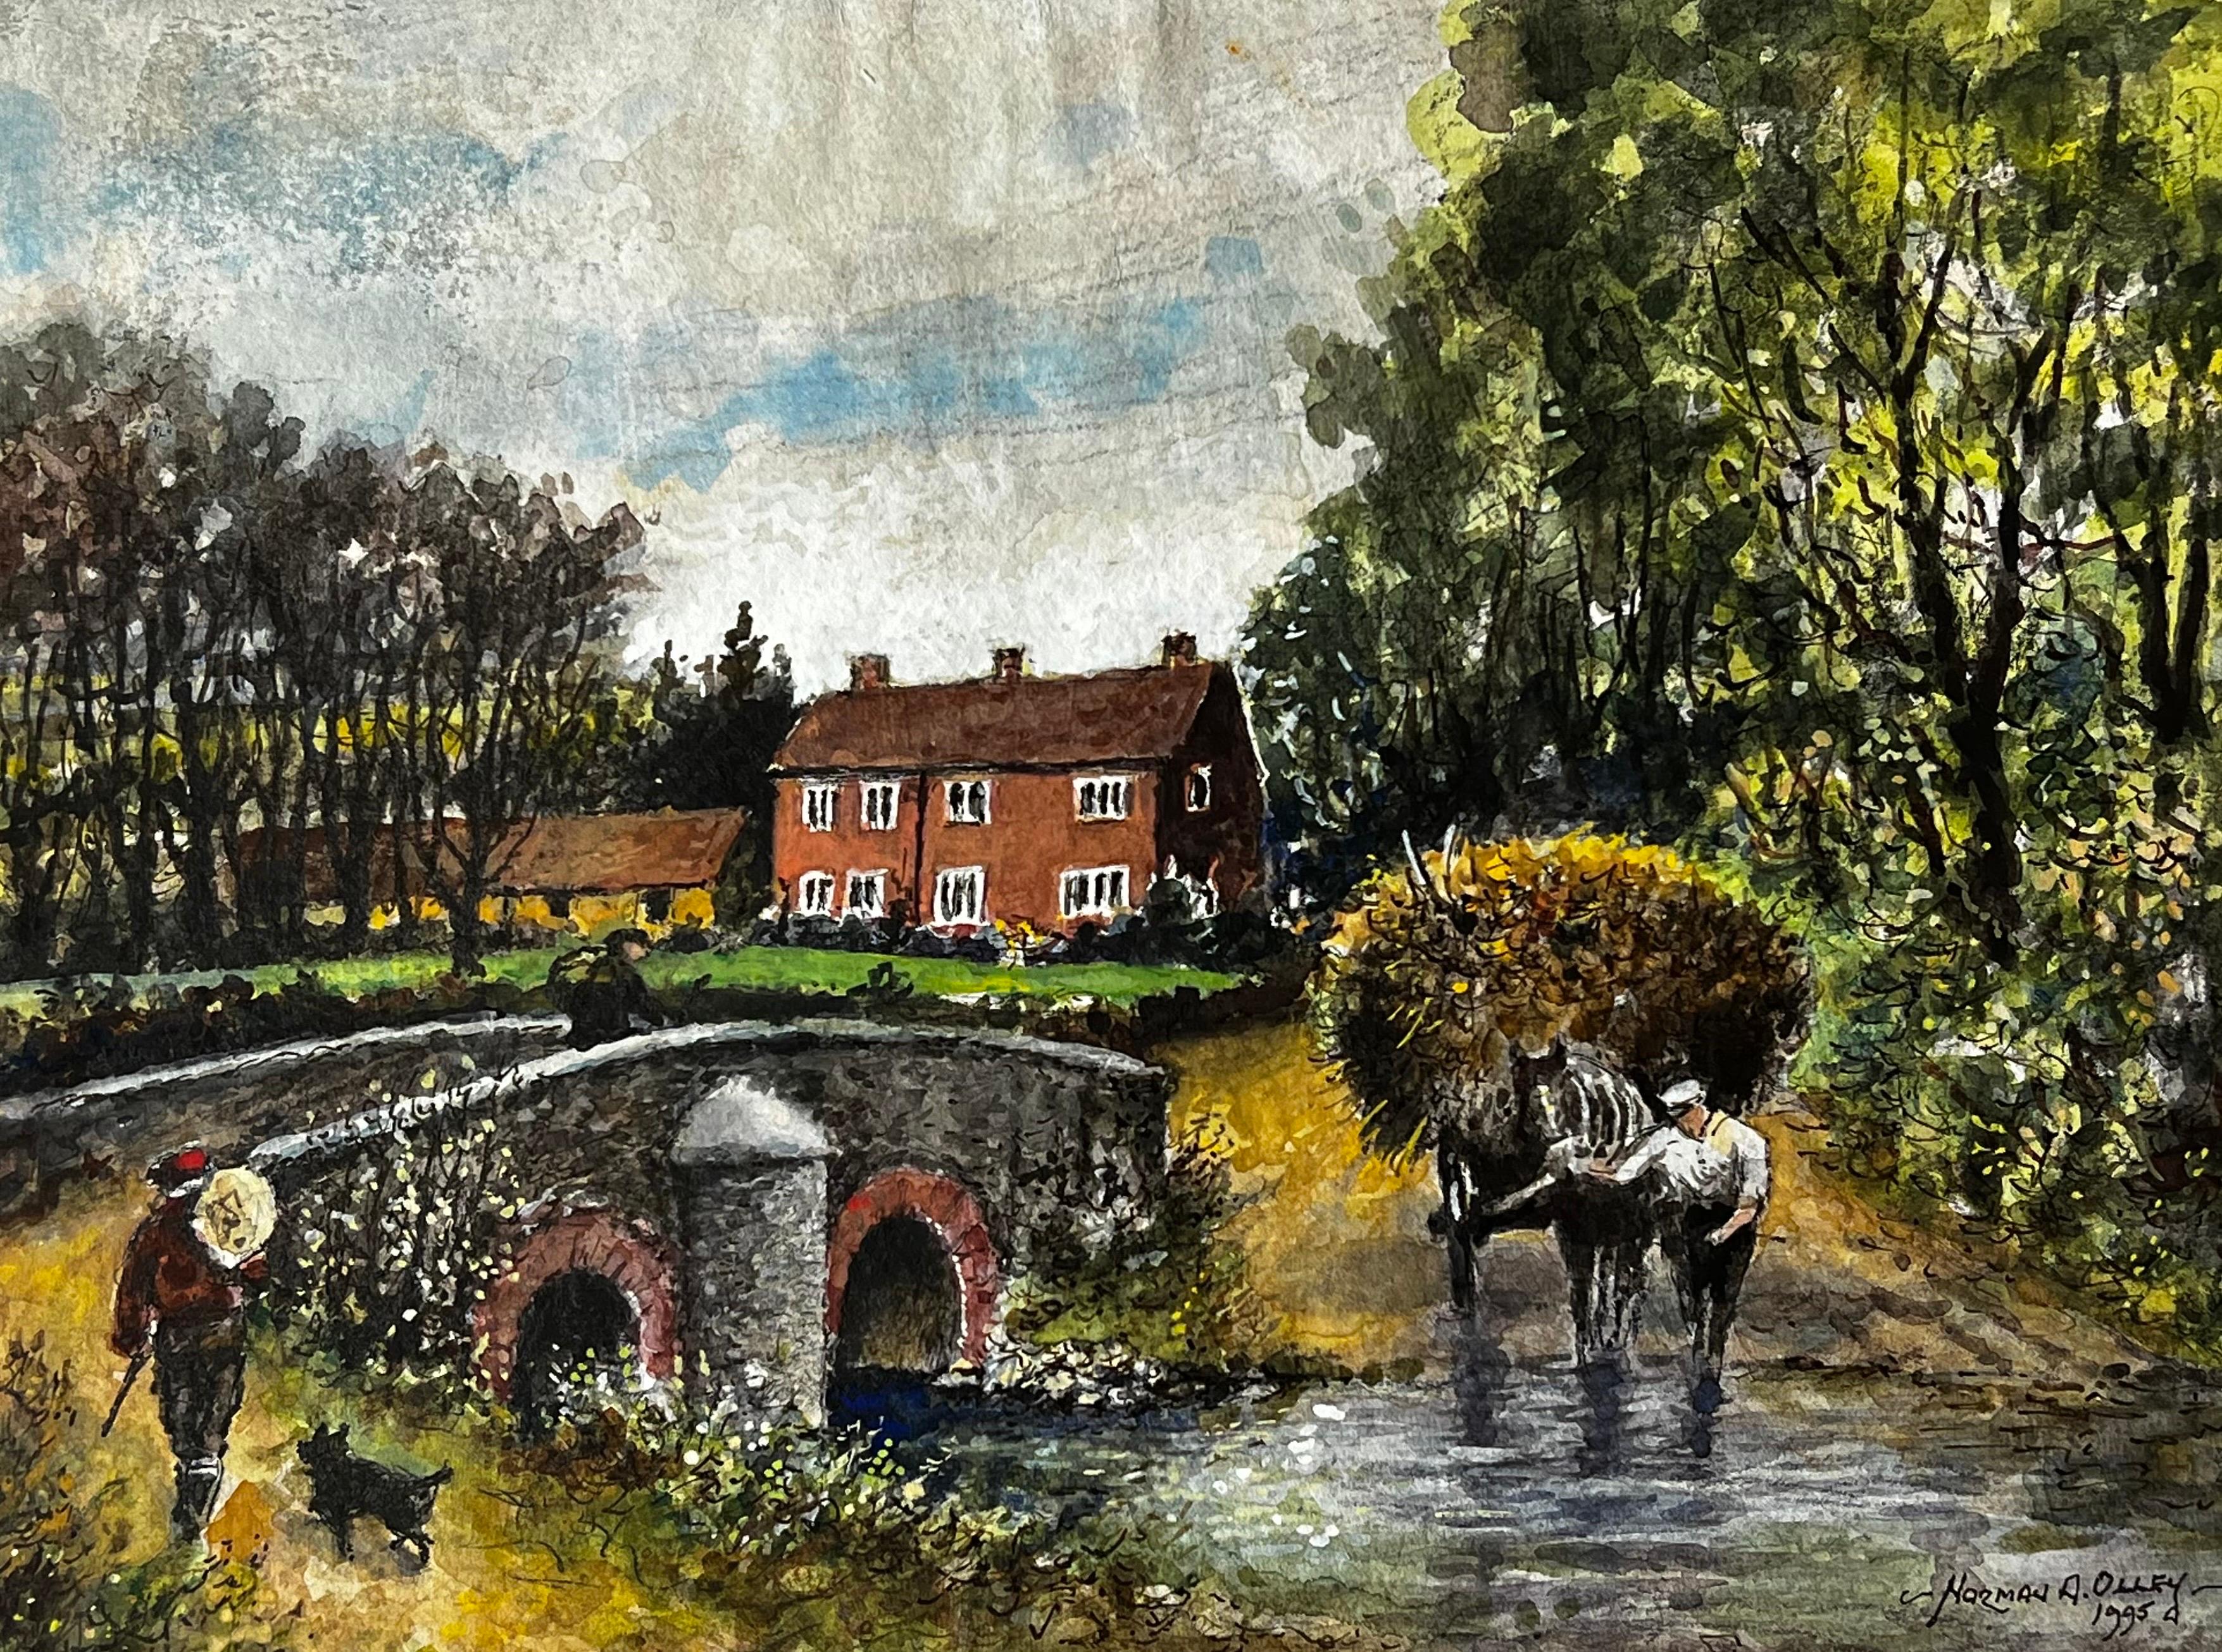 Norman A Olley Figurative Painting - Haycart Crossing The Ford Of The Old Packhorse Bridge